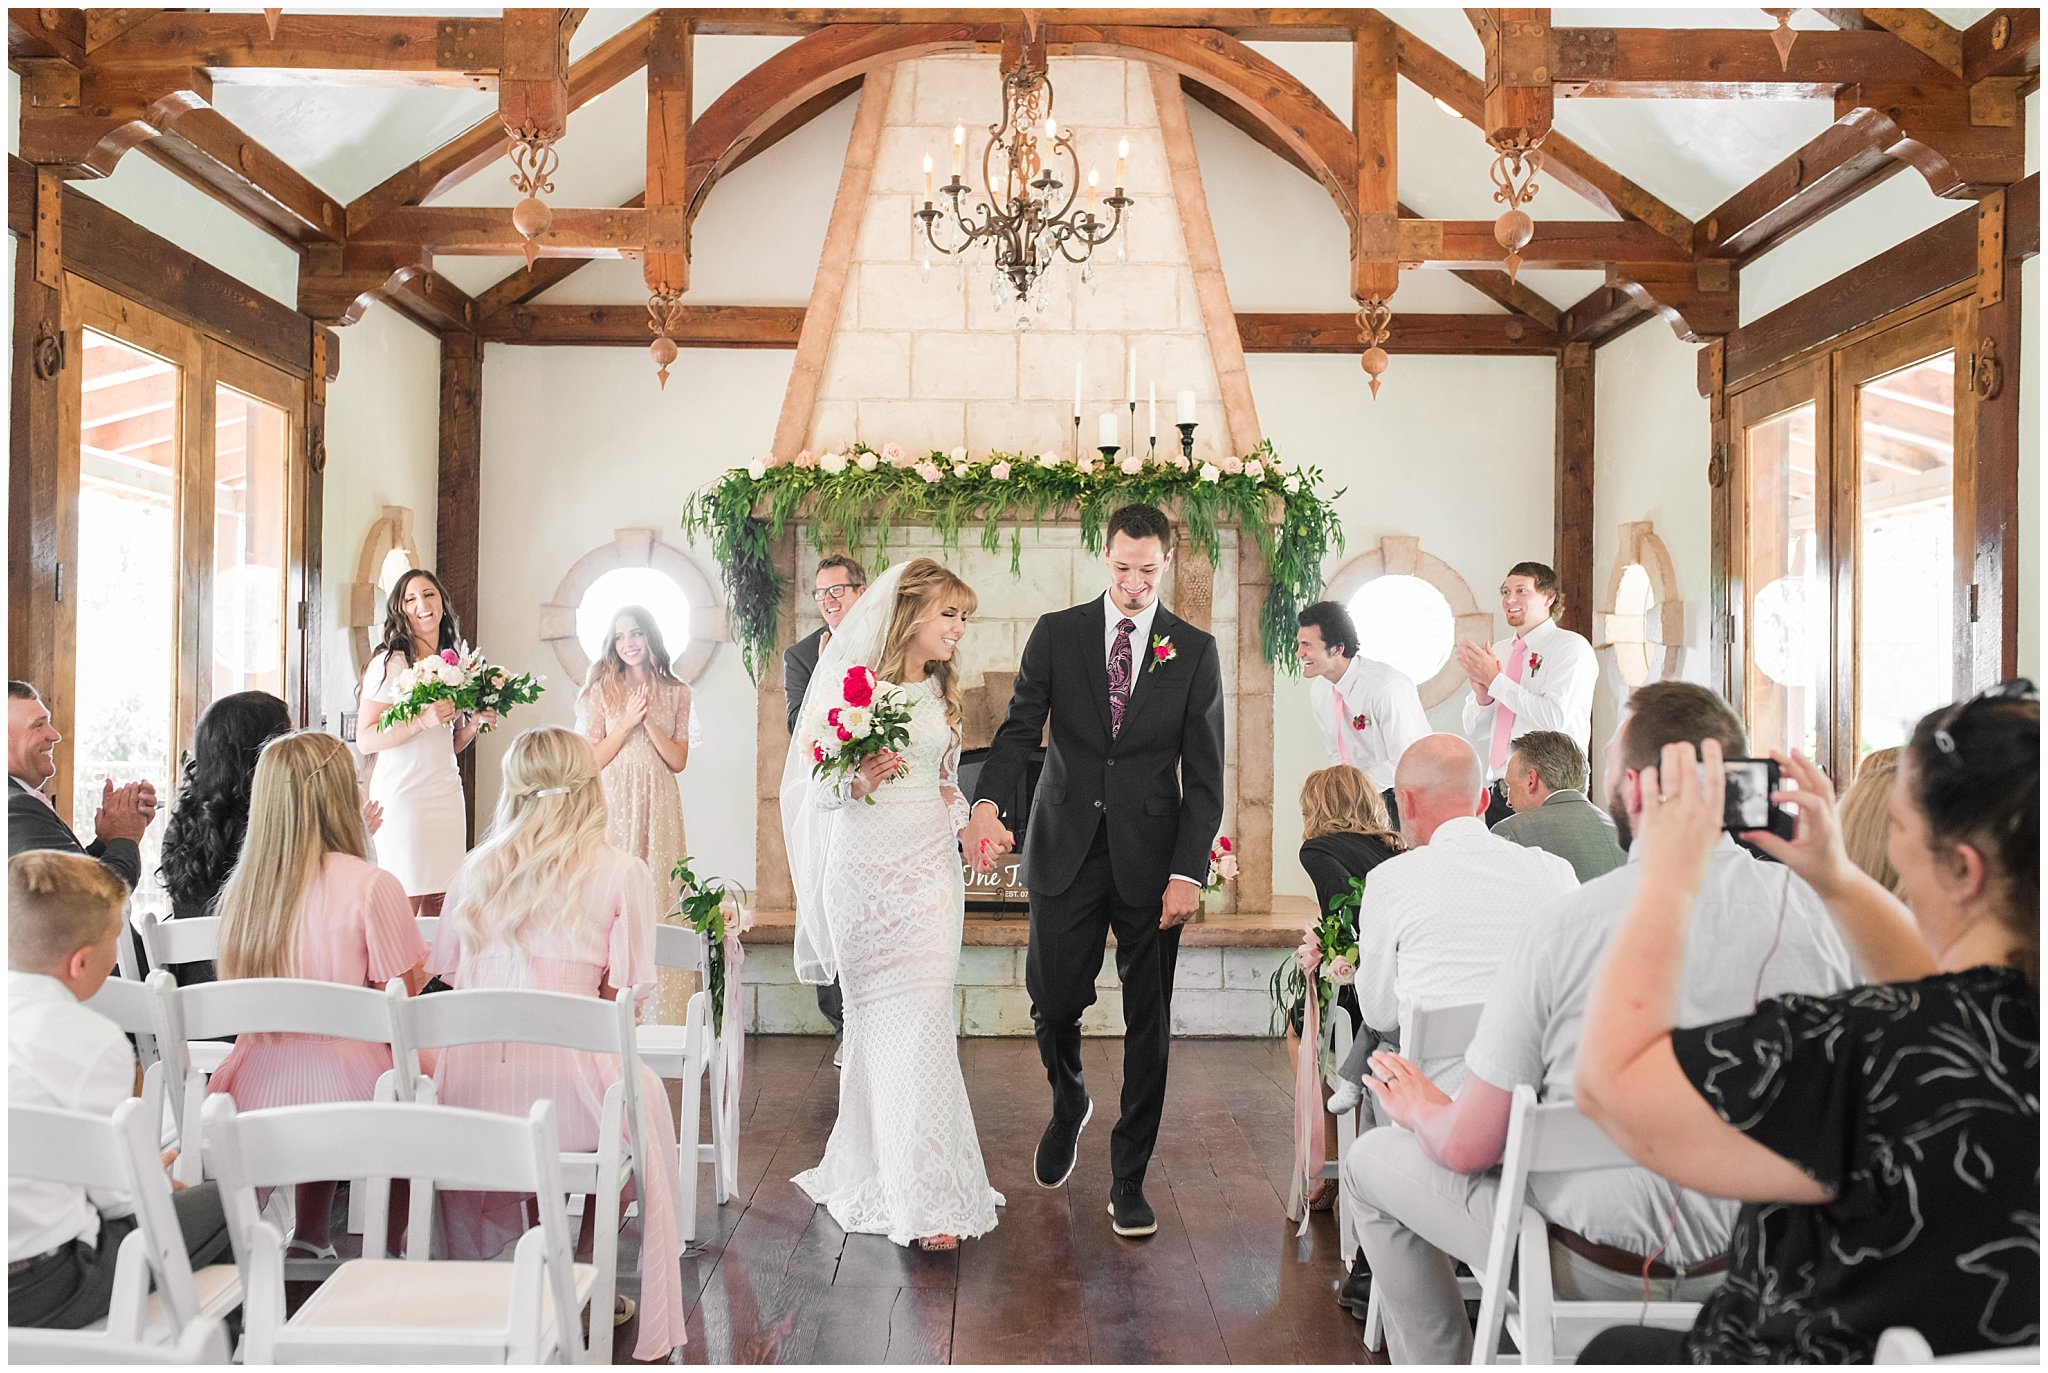 Ceremony in Railroad building at Wadley Farms | Wadley Farms Summer Wedding | Jessie and Dallin Photography